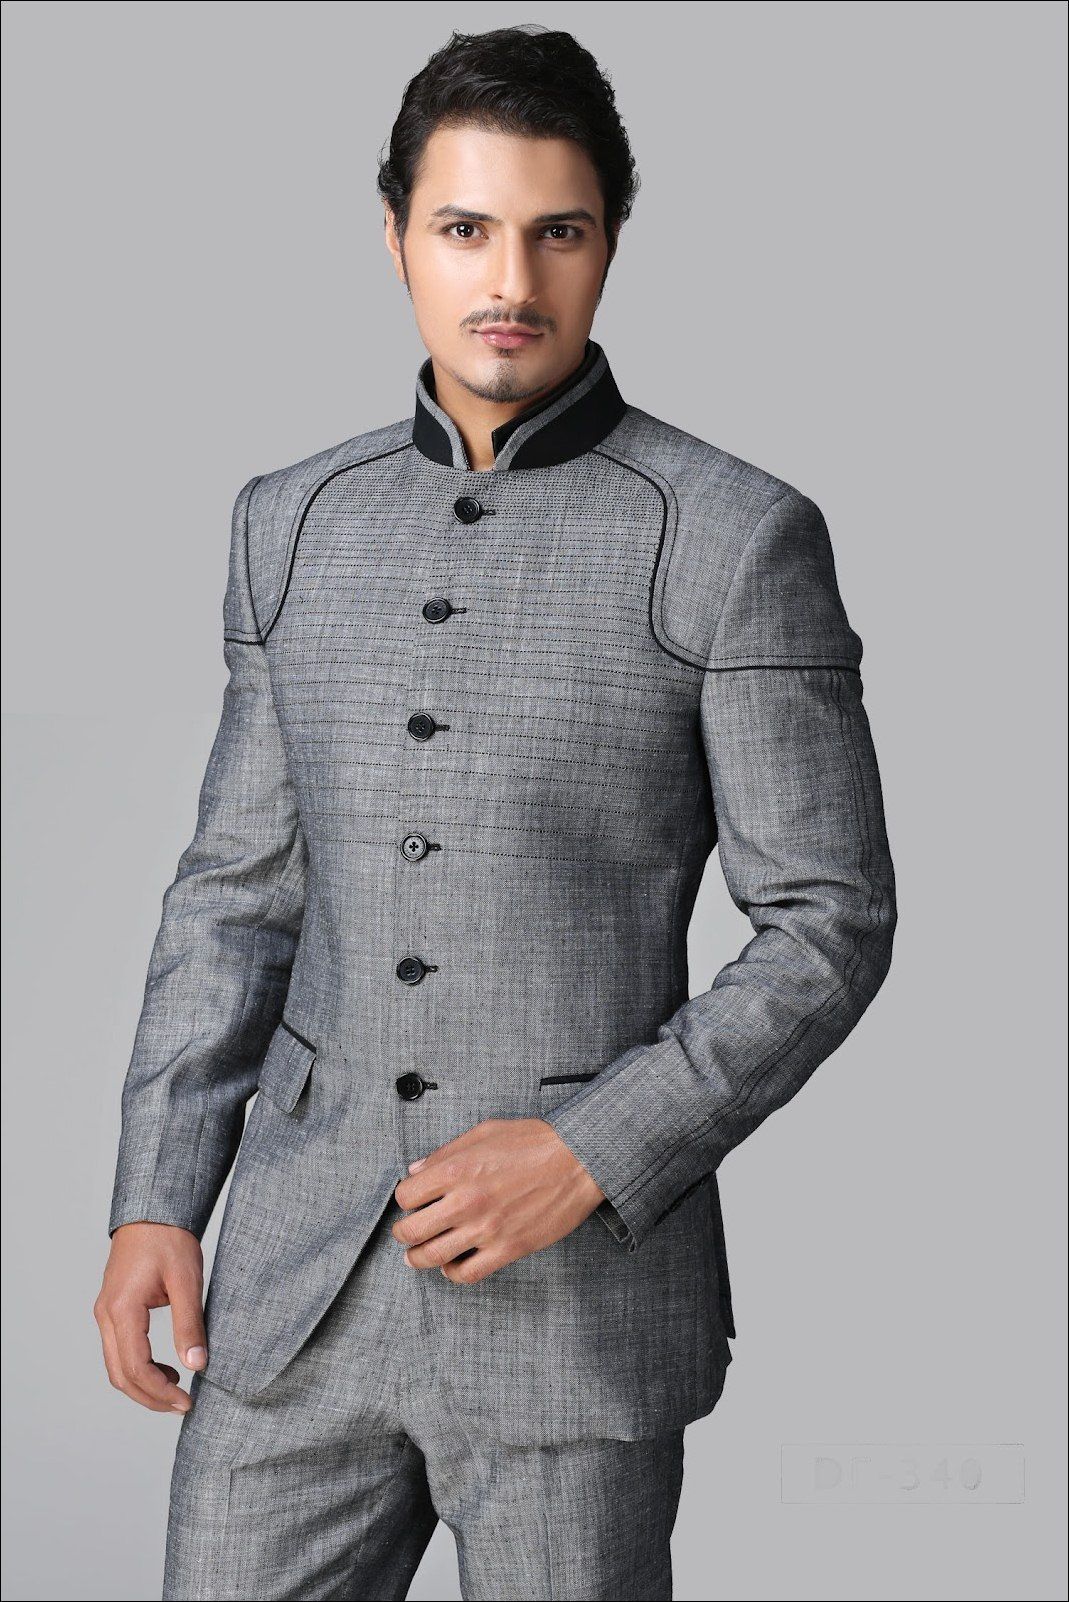 Designer suits for chubby men